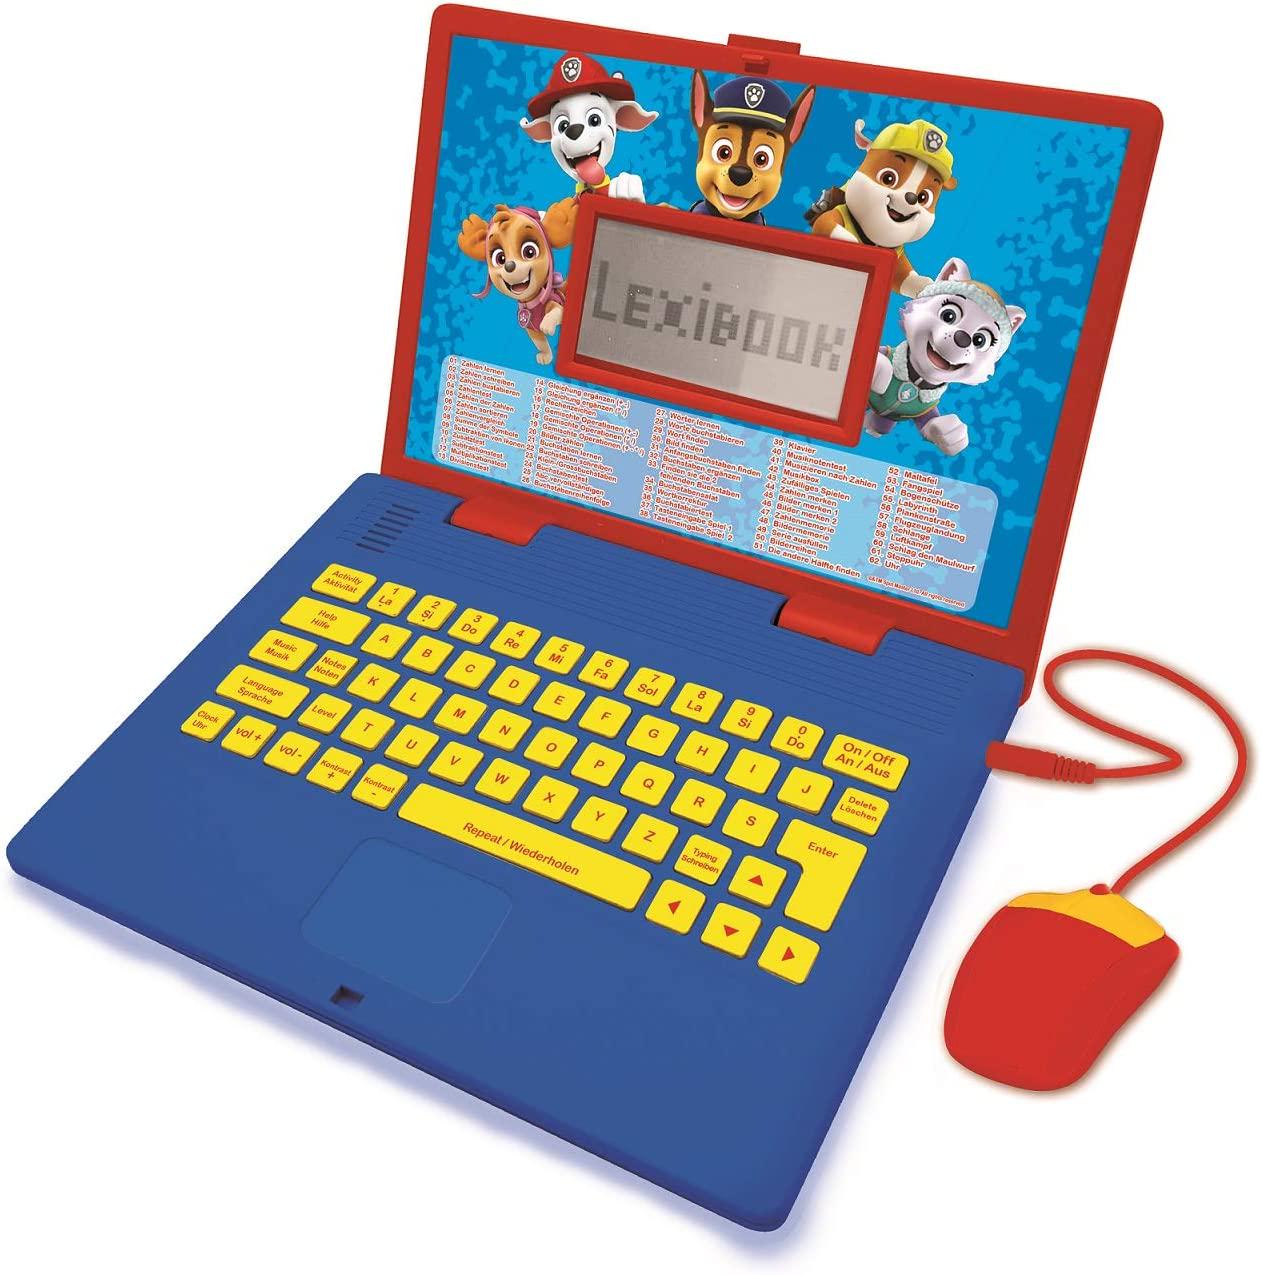 Lexibook, LEXIBOOK JC598PAi3 Paw Patrol-Educational and Bilingual Laptop German/English-Toy for Child Kid (Boys and Girls) 124 Activities, Learn Play Games and Music with Chase Marshall-Red/Blue